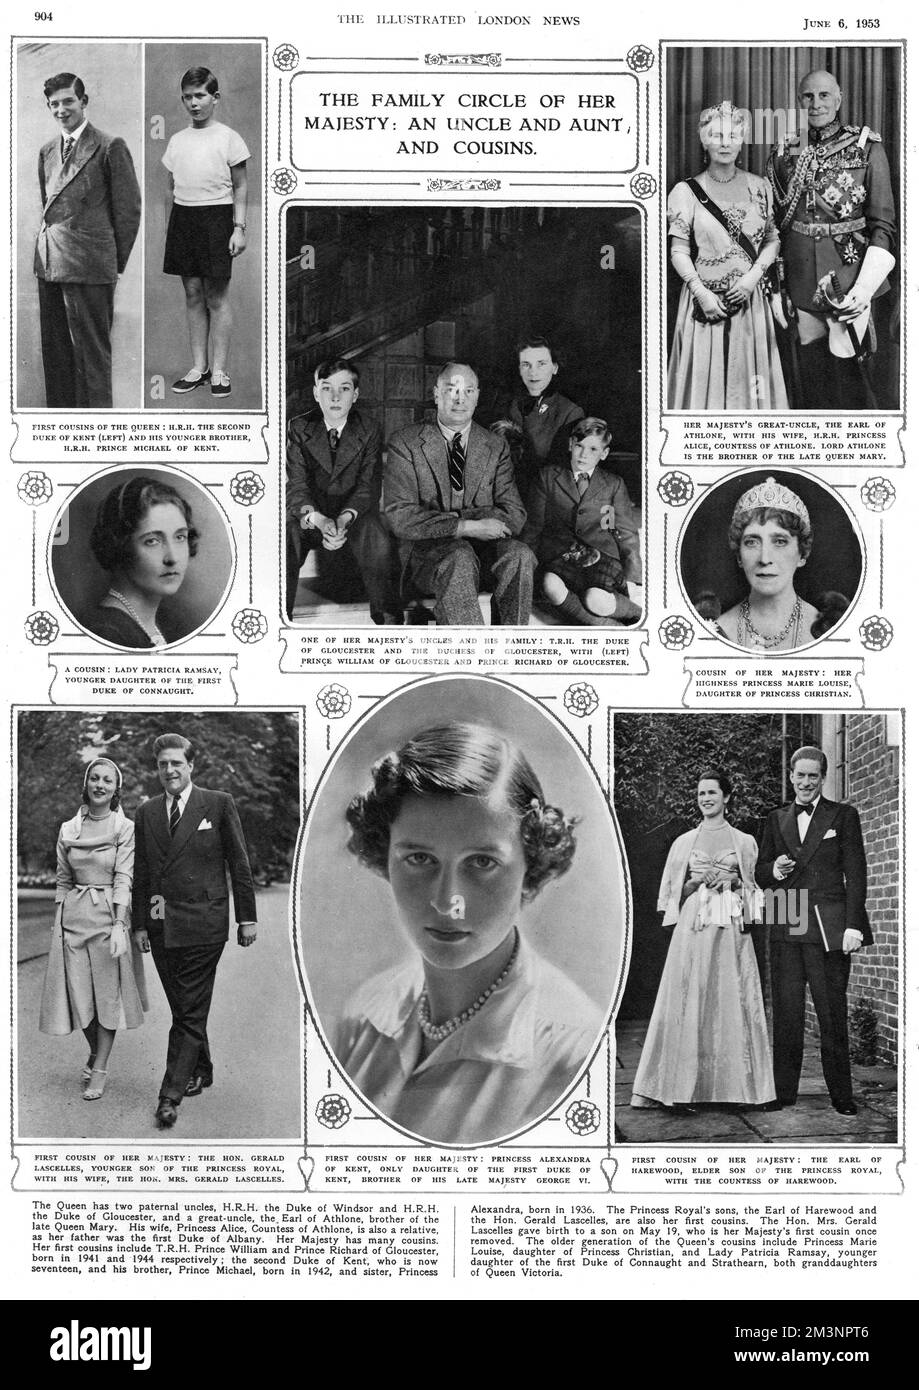 The family circle of Queen Elizabeth II, many of whom attended the coronation on 2nd June 1953. Clockwise from top left: H.R.H. The Second Duke of Kent and his younger brother, H.R.H. Prince Michael of Kent; The Duke and Duchess of Gloucester with their children; The Earl and Countess of Athlone; Princess Marie Louise; The Earl and Countess of Harewood; Princess Alexandra of Kent; The Hon. Gerald Lascelles with his wife; and Lady Patricia Ramsay.     Date: 1953 Stock Photo